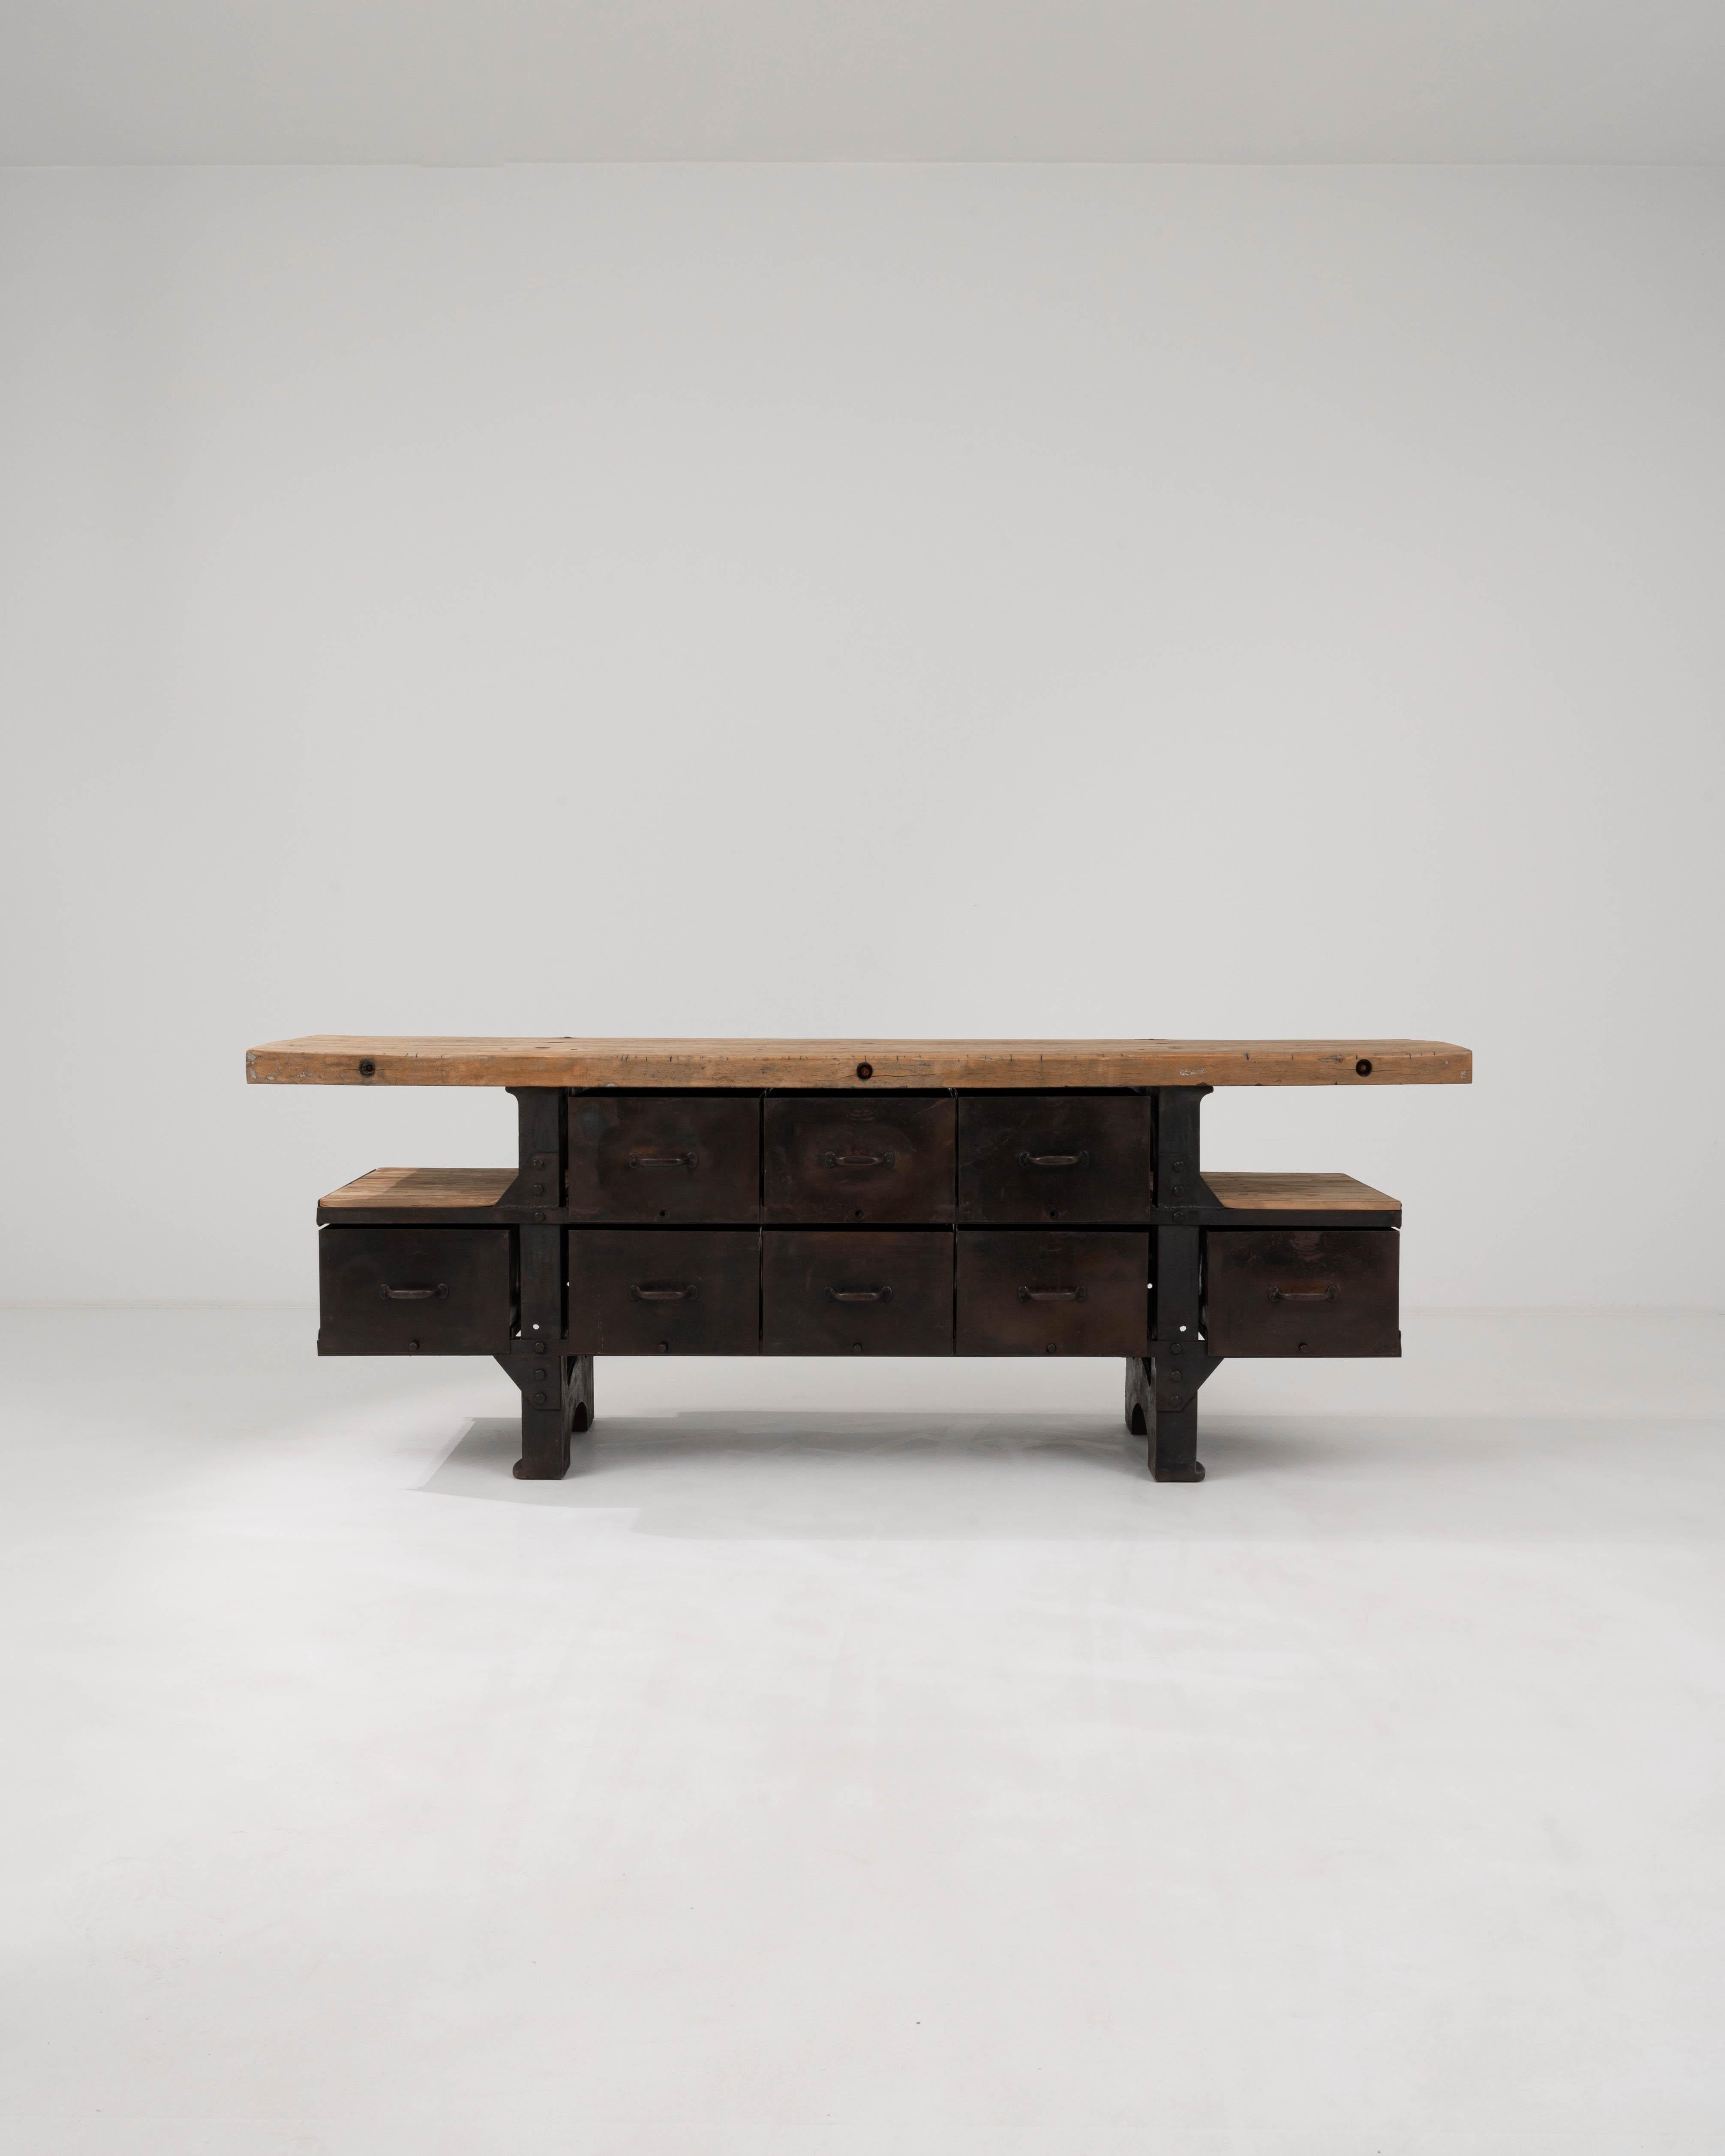 This 20th Century Belgian Industrial Table is a robust addition to any space that appreciates the raw, unrefined aesthetic of industrial design. The substantial wooden tabletop, worn with time and use, bears the marks and stories of a bygone